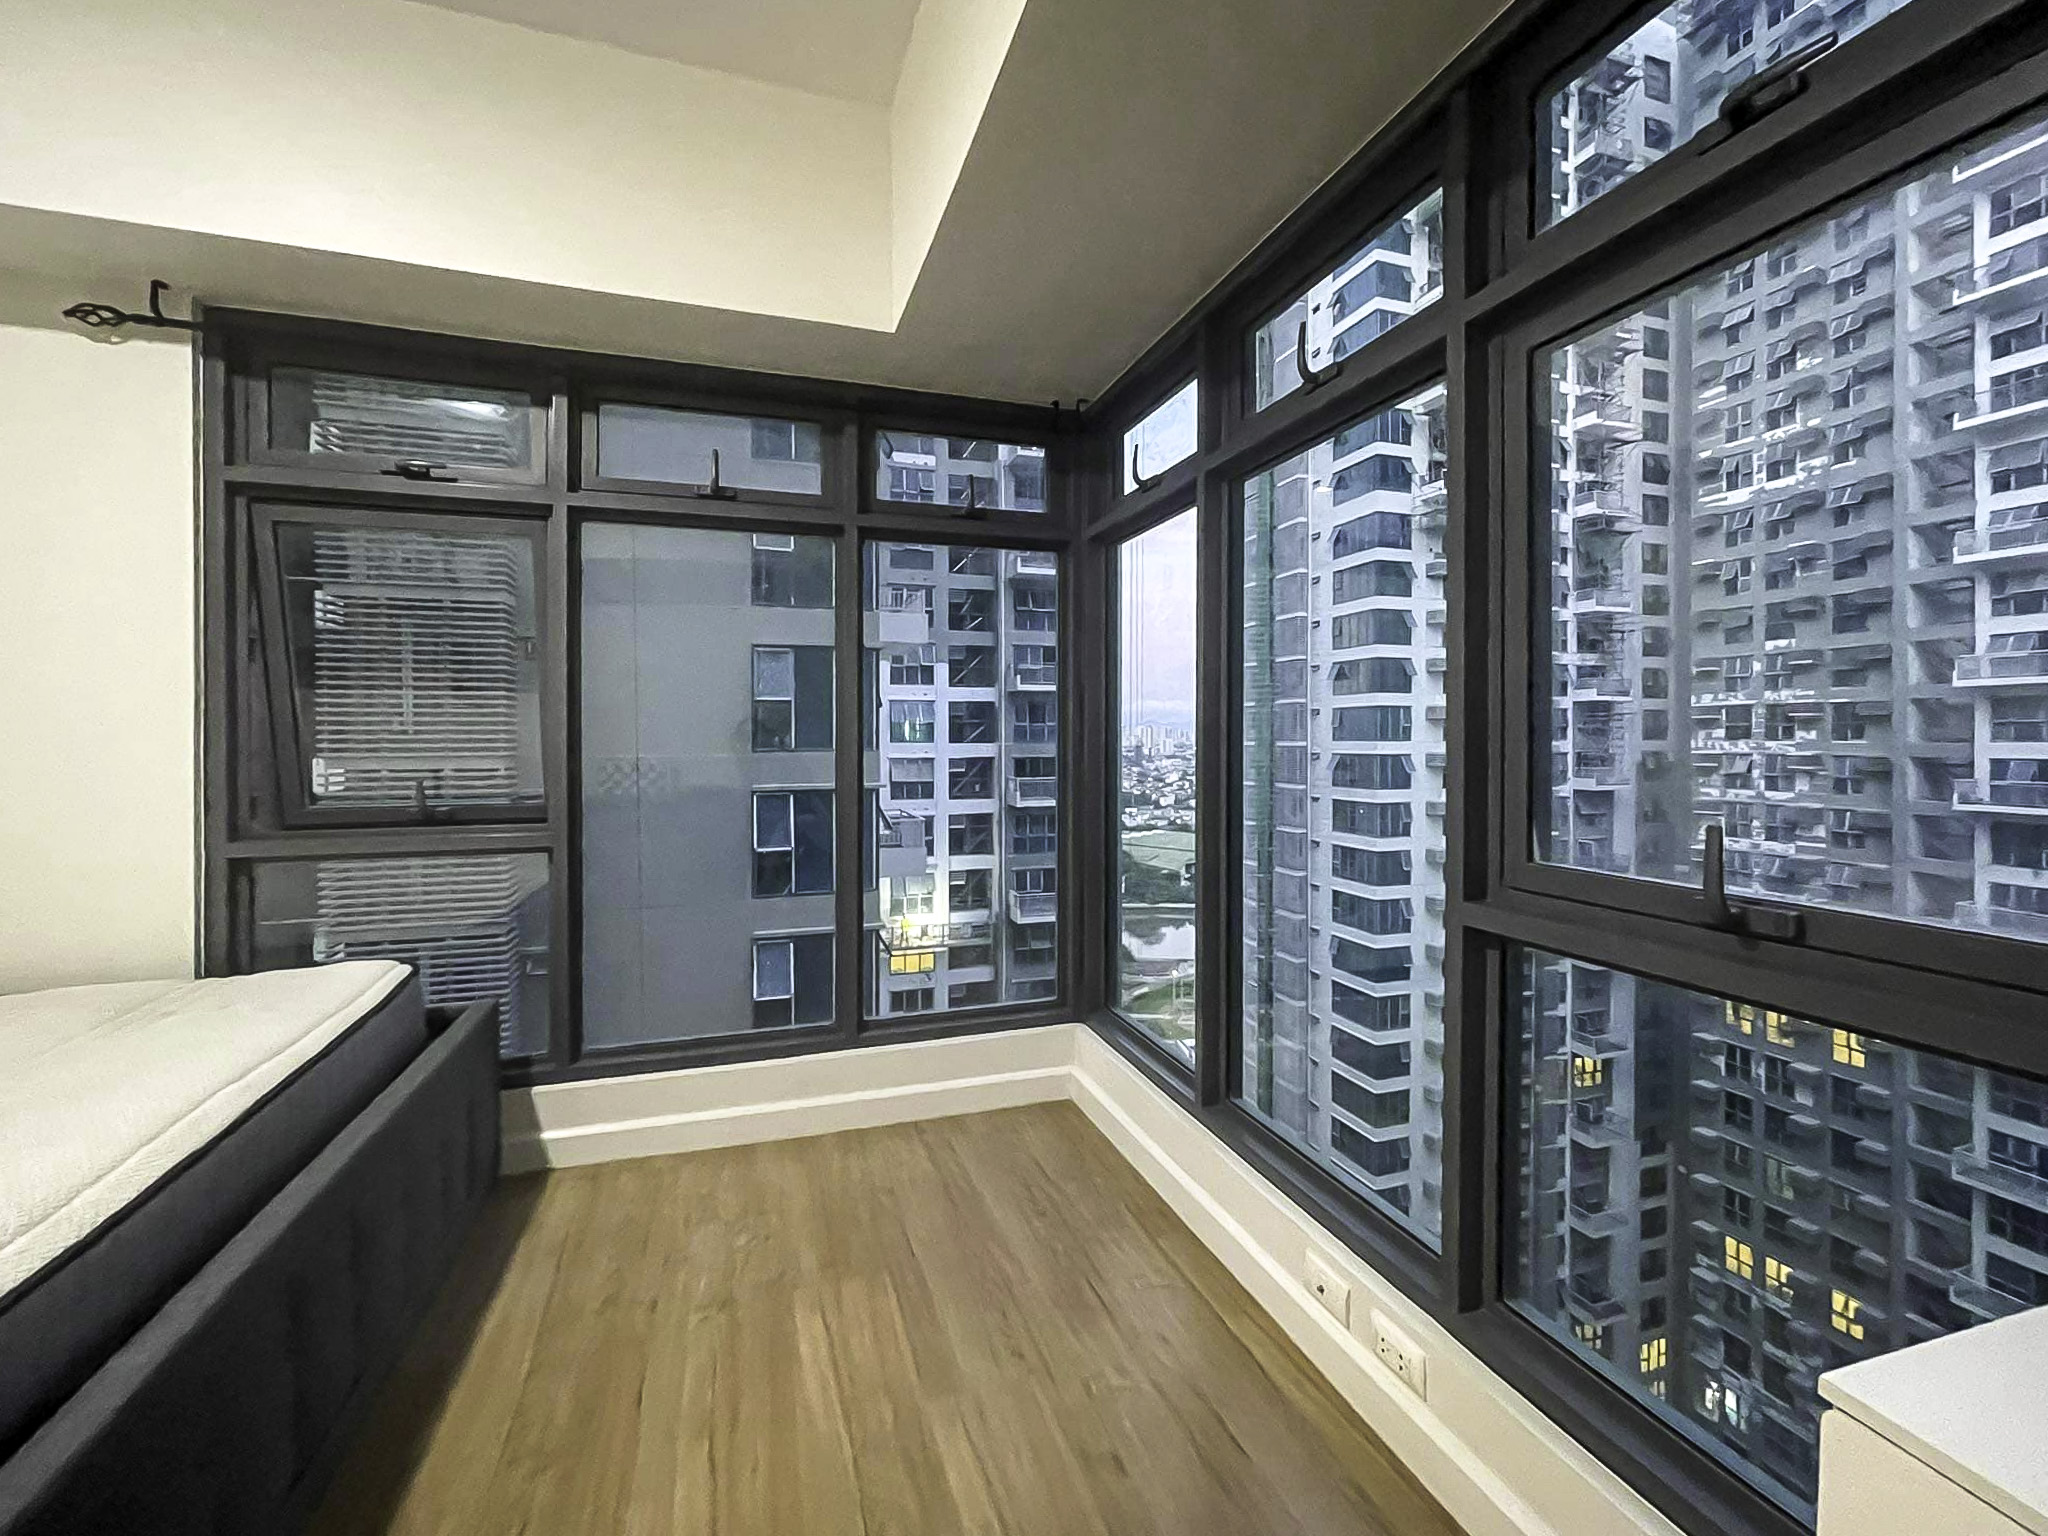 For Rent: Fully Furnished 2BR Condo Unit in Solstice Tower, Makati City